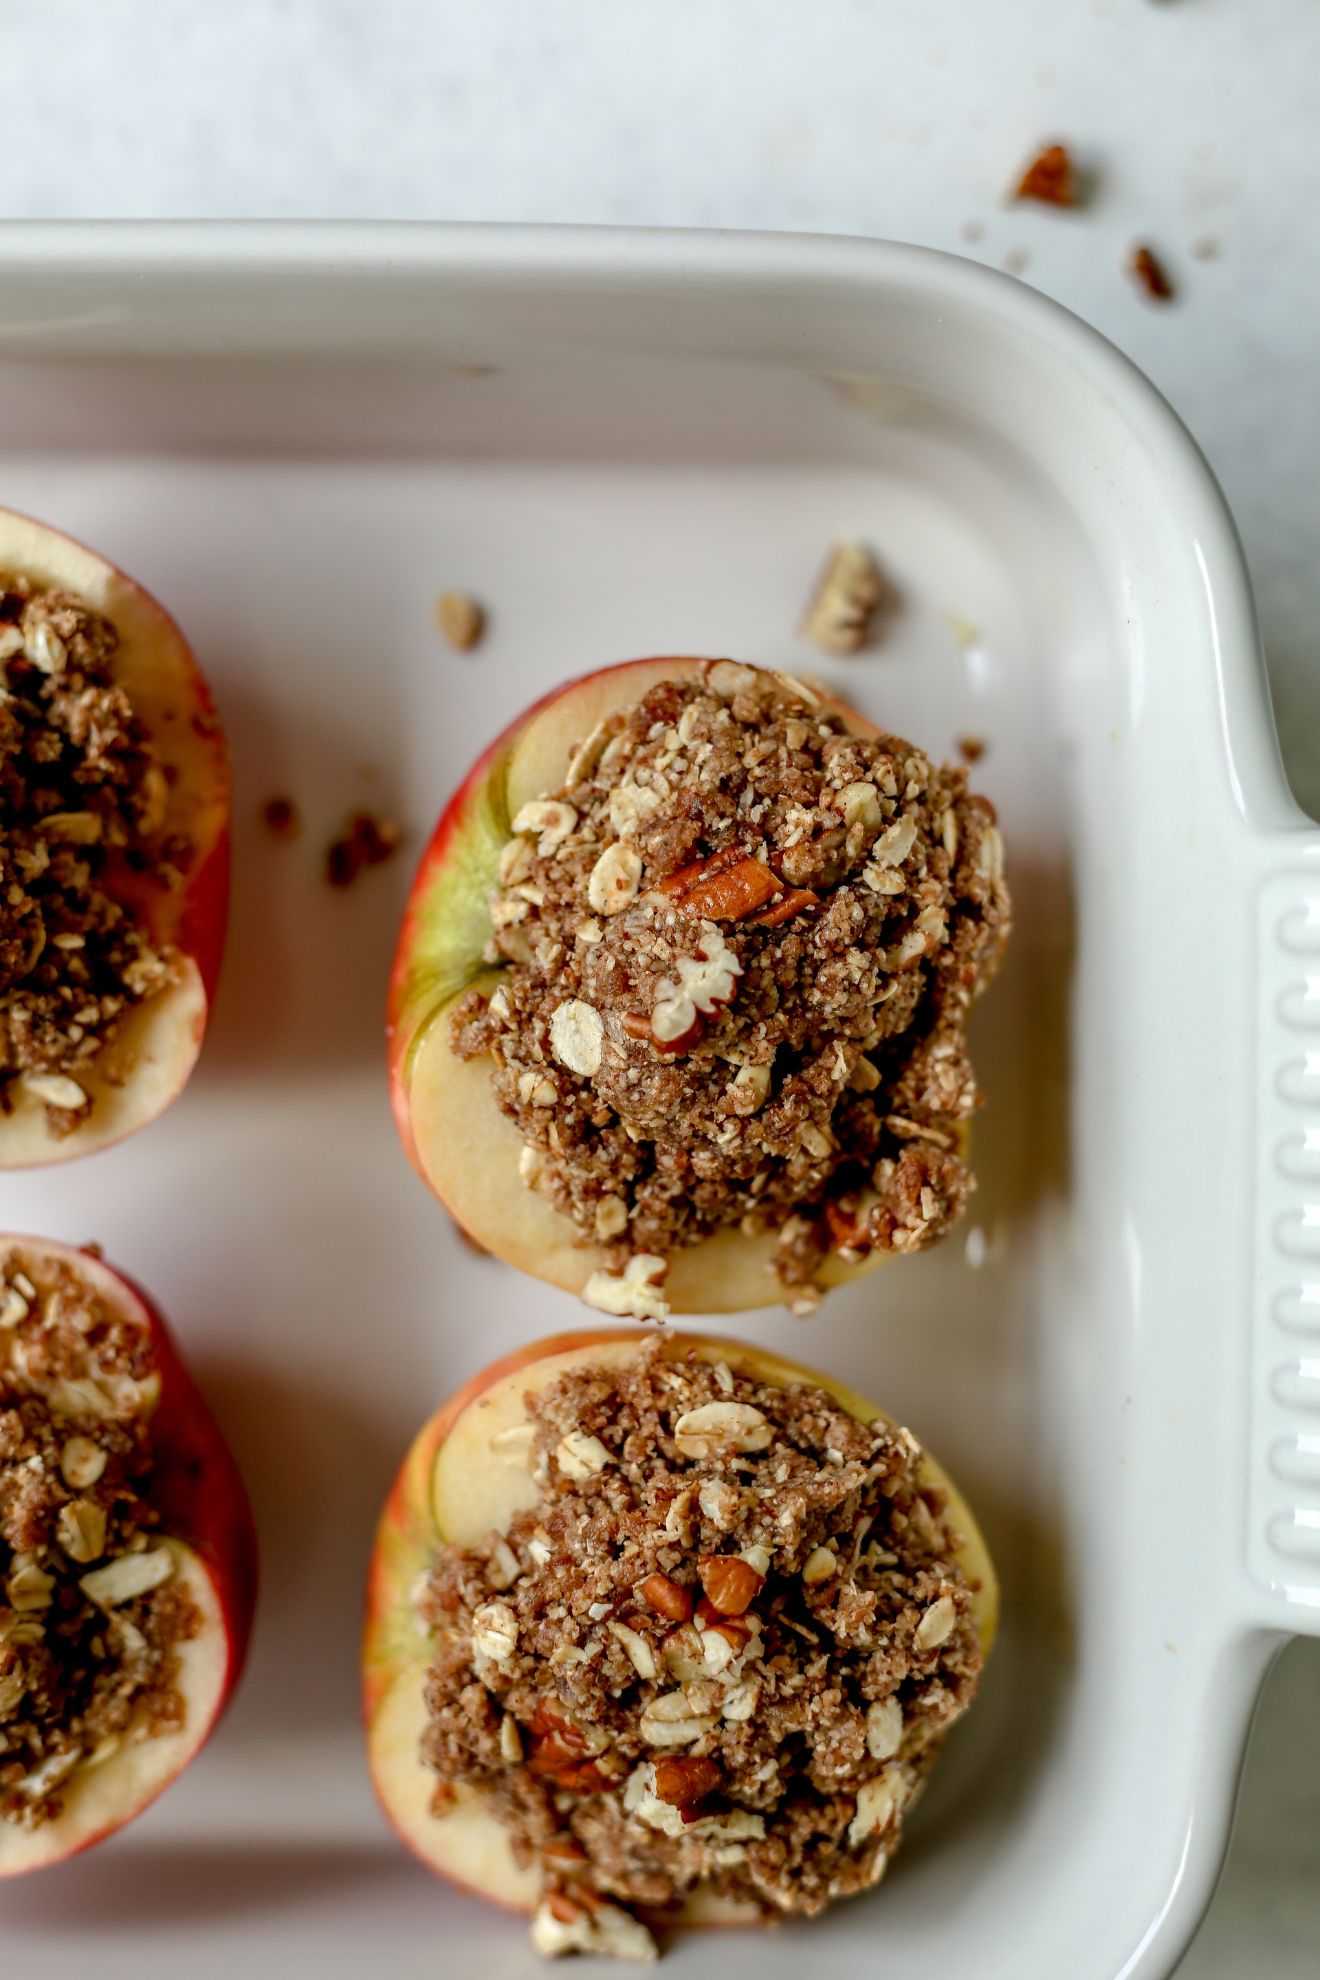 This is an overhead image of a baking dish with halved apples and topped with an oat crumble. The backing dish has four apples in it and is sitting on a white surface.